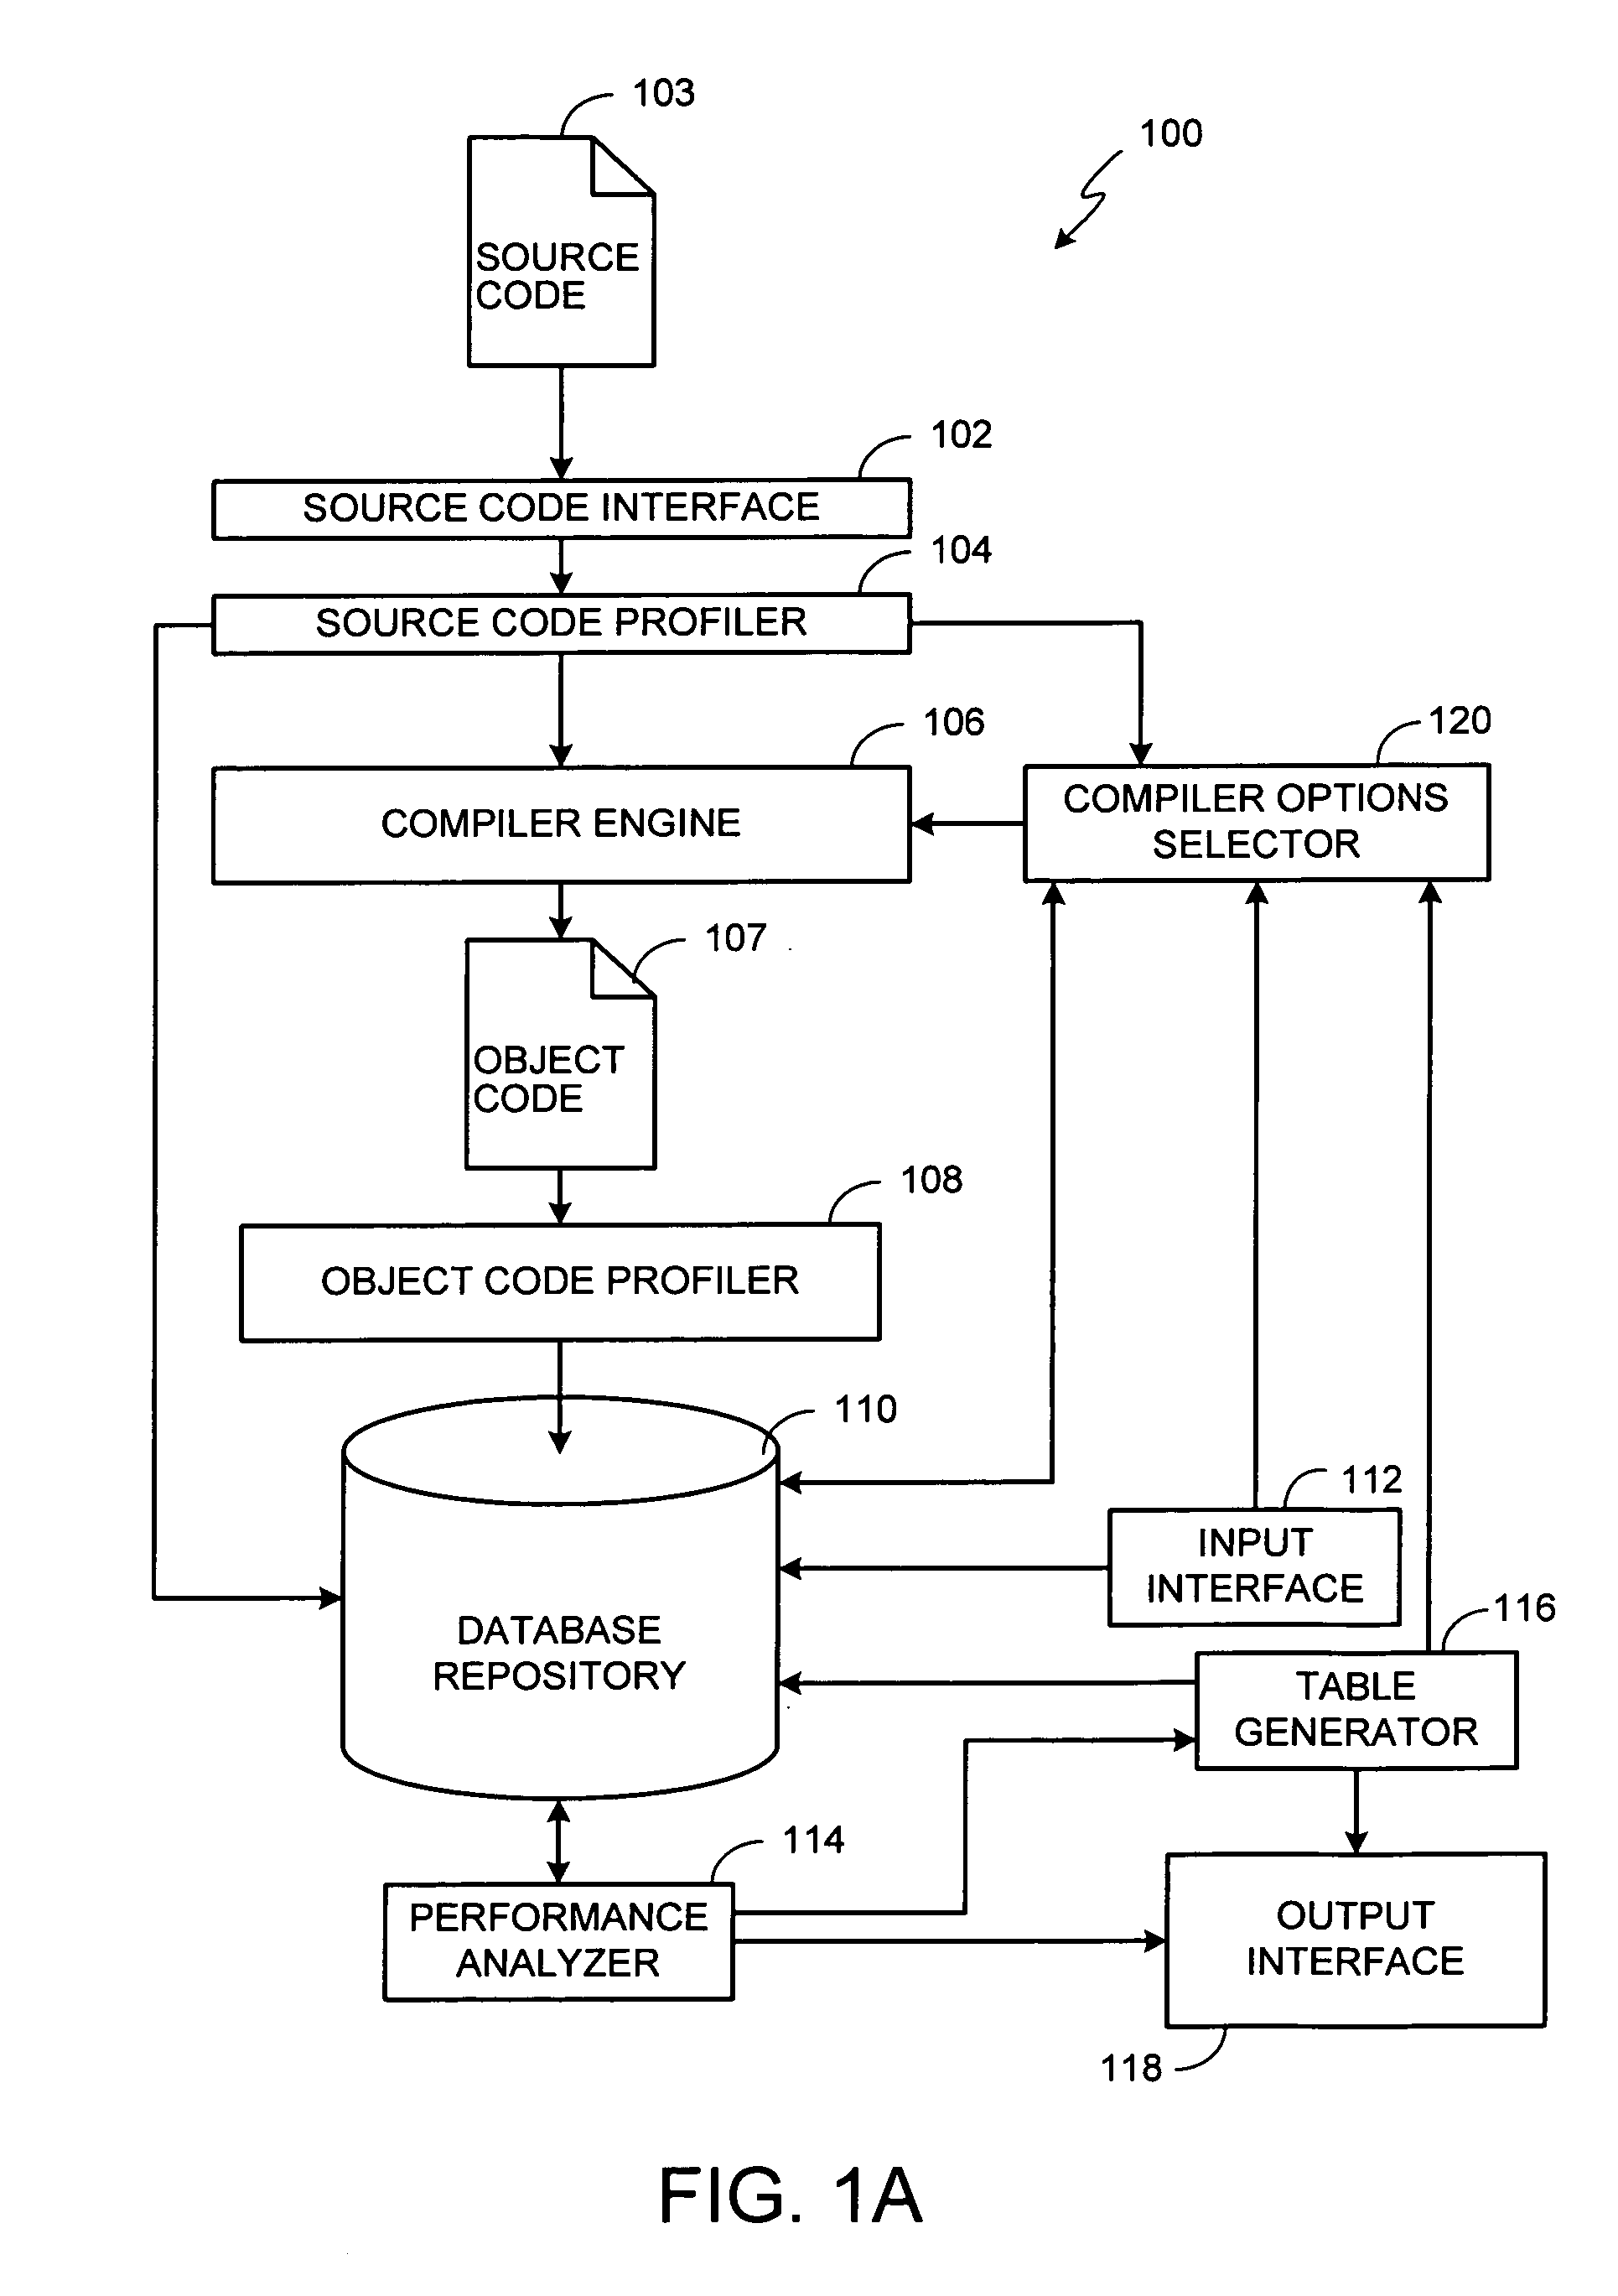 Methods and apparatus to iteratively compile software to meet user-defined criteria